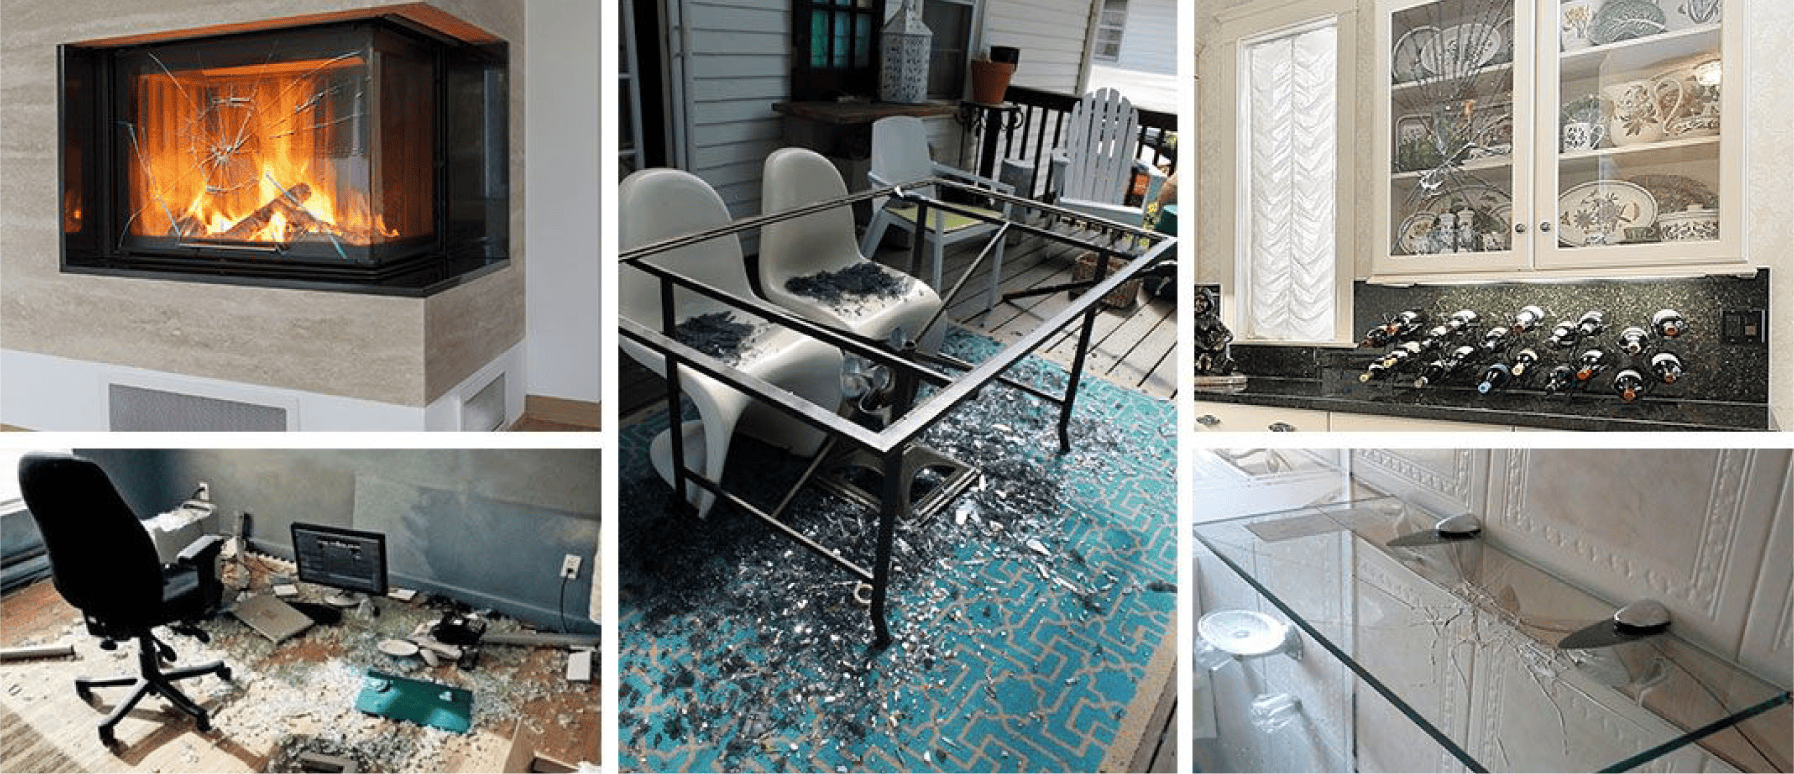 1st: Shattered wall-mounted fireplace on beige wall. 2nd: Broken glass tabletop in office, items scattered. 3rd: Outdoor glass table shattered on porch. 4th: Dramatically cracked glass cabinet in kitchen. 5th: Wall-mounted glass shelf with severe cracks.